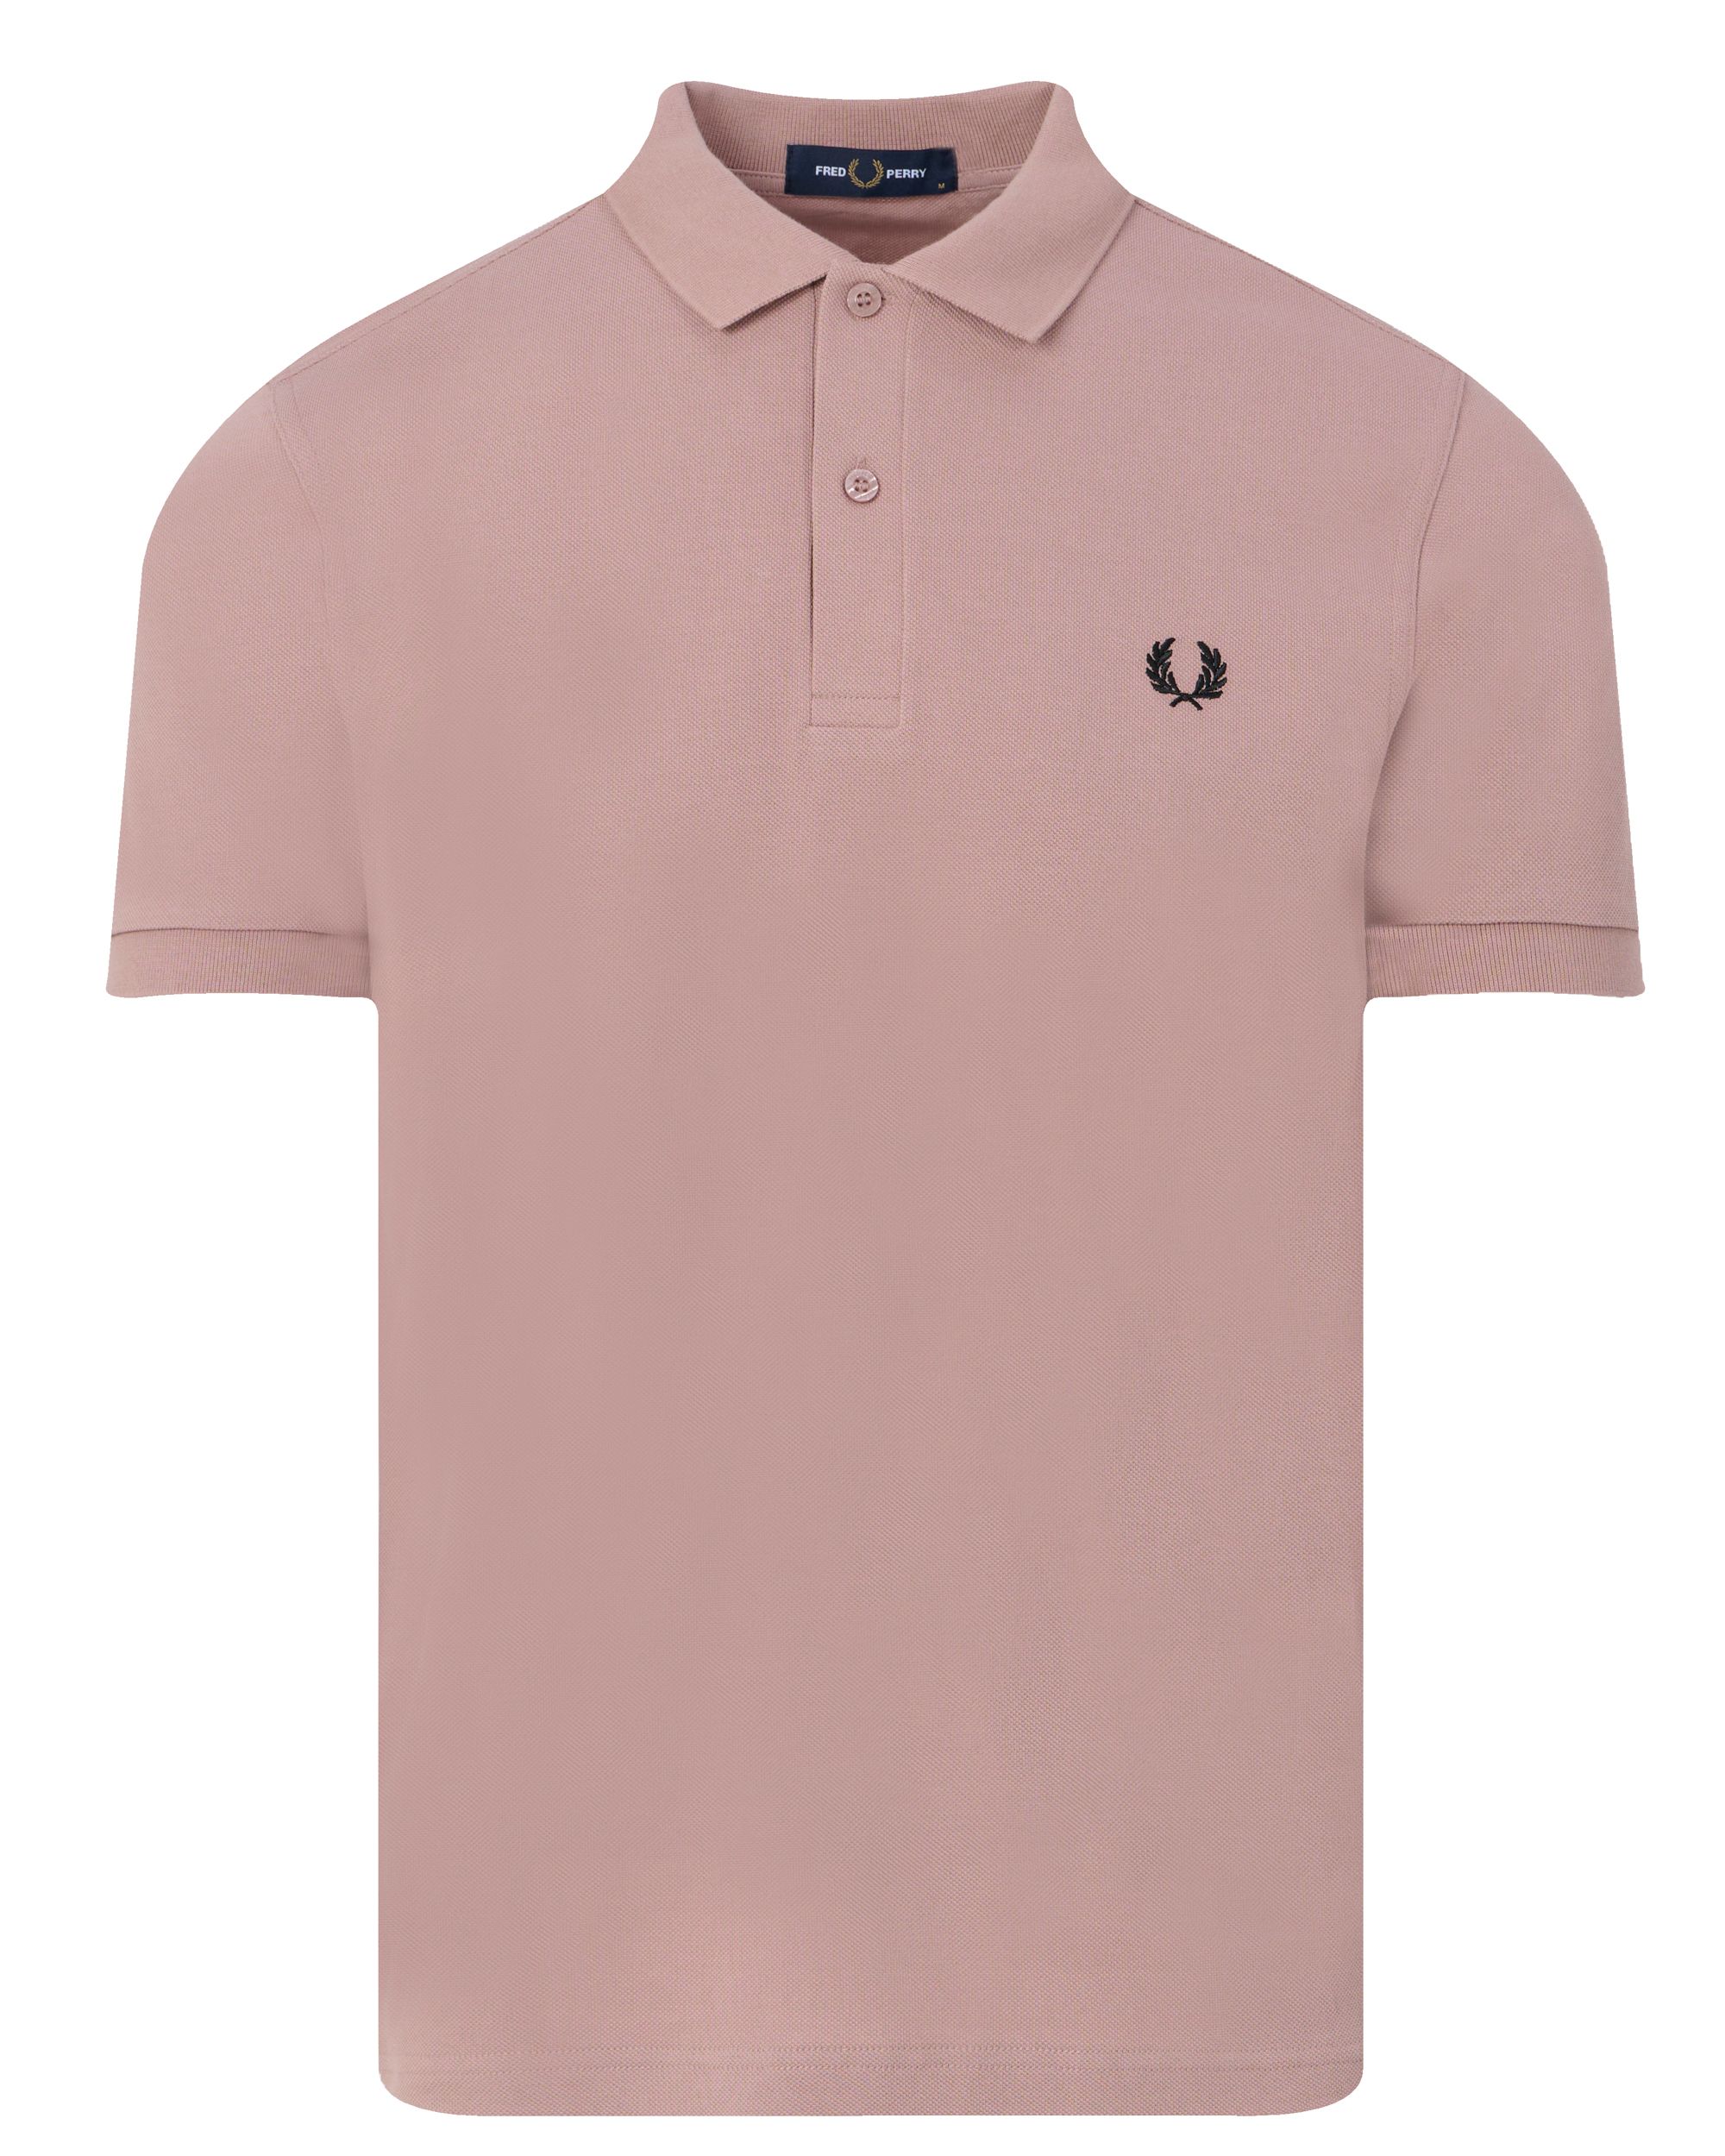 Fred Perry Polo KM Roze 091960-001-S